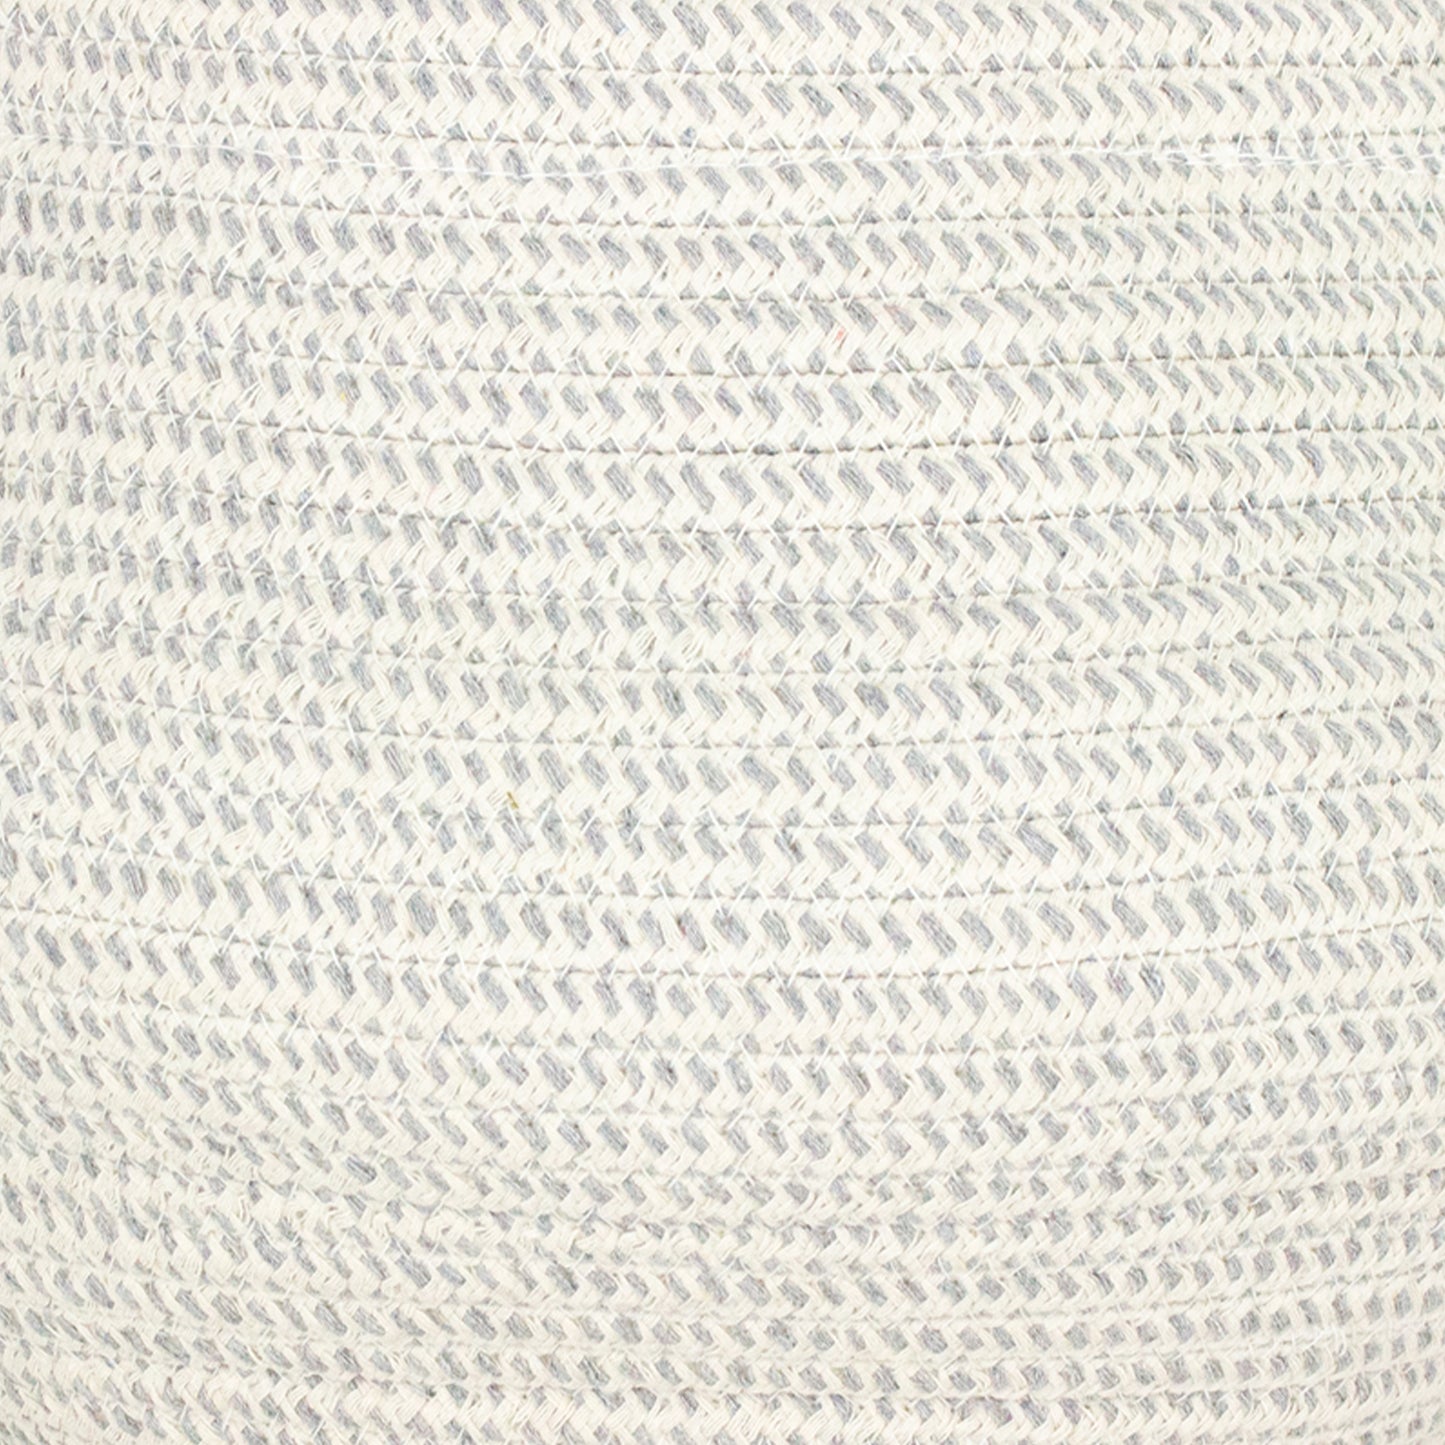 heathered grey cable basket material